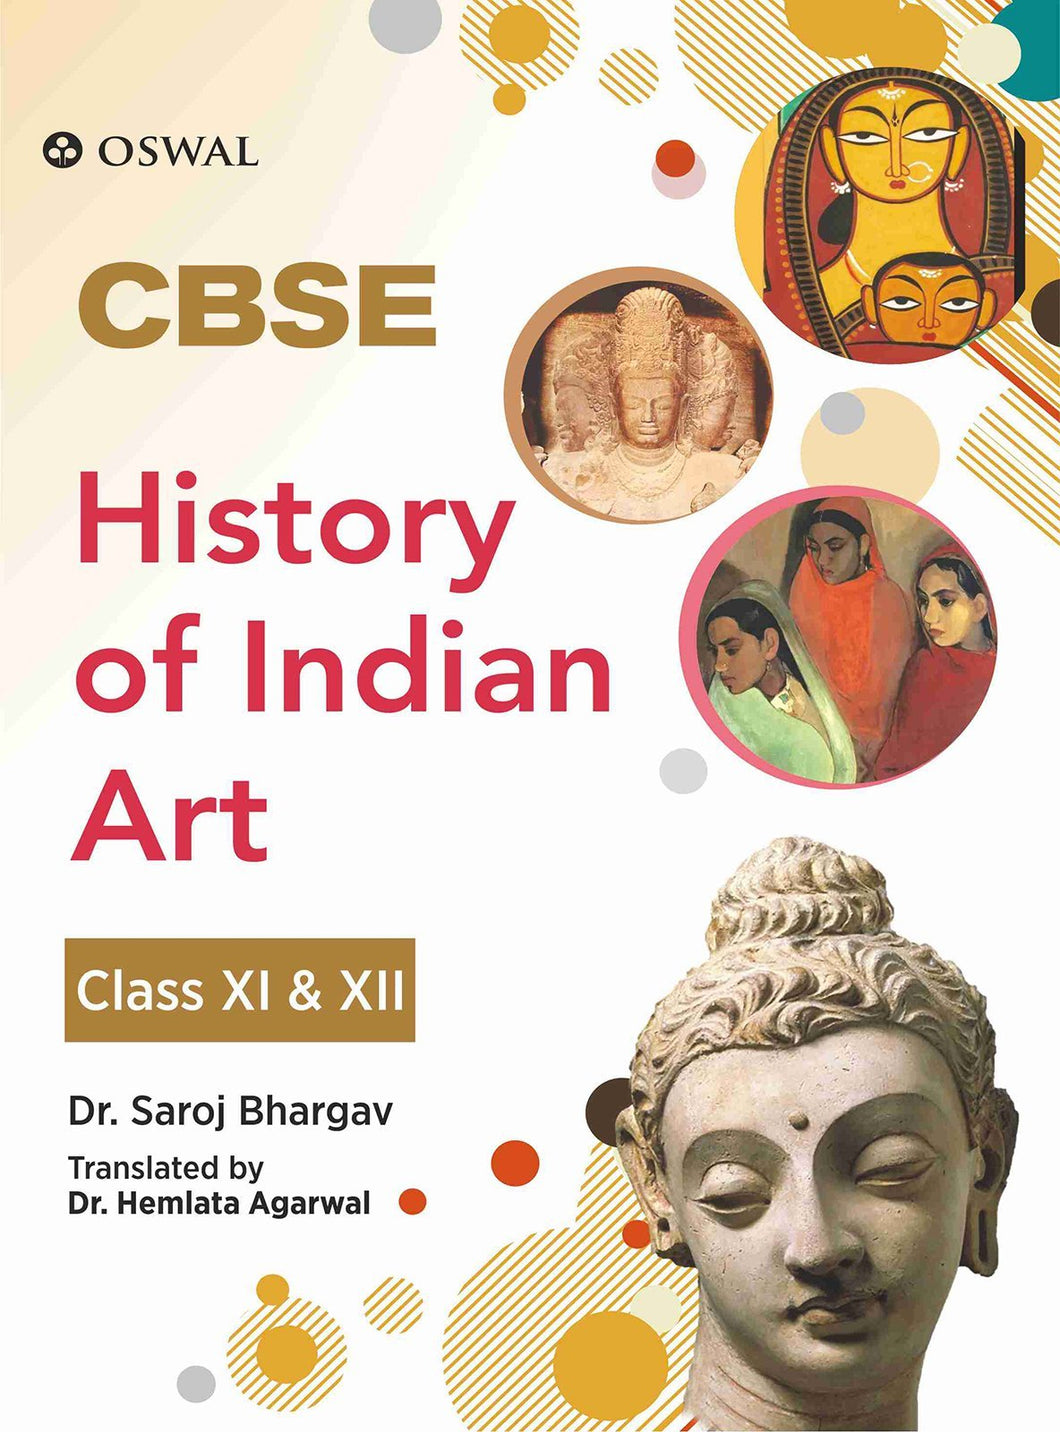 Oswal History of Fine Arts: Textbook for CBSE Class 11 & 12